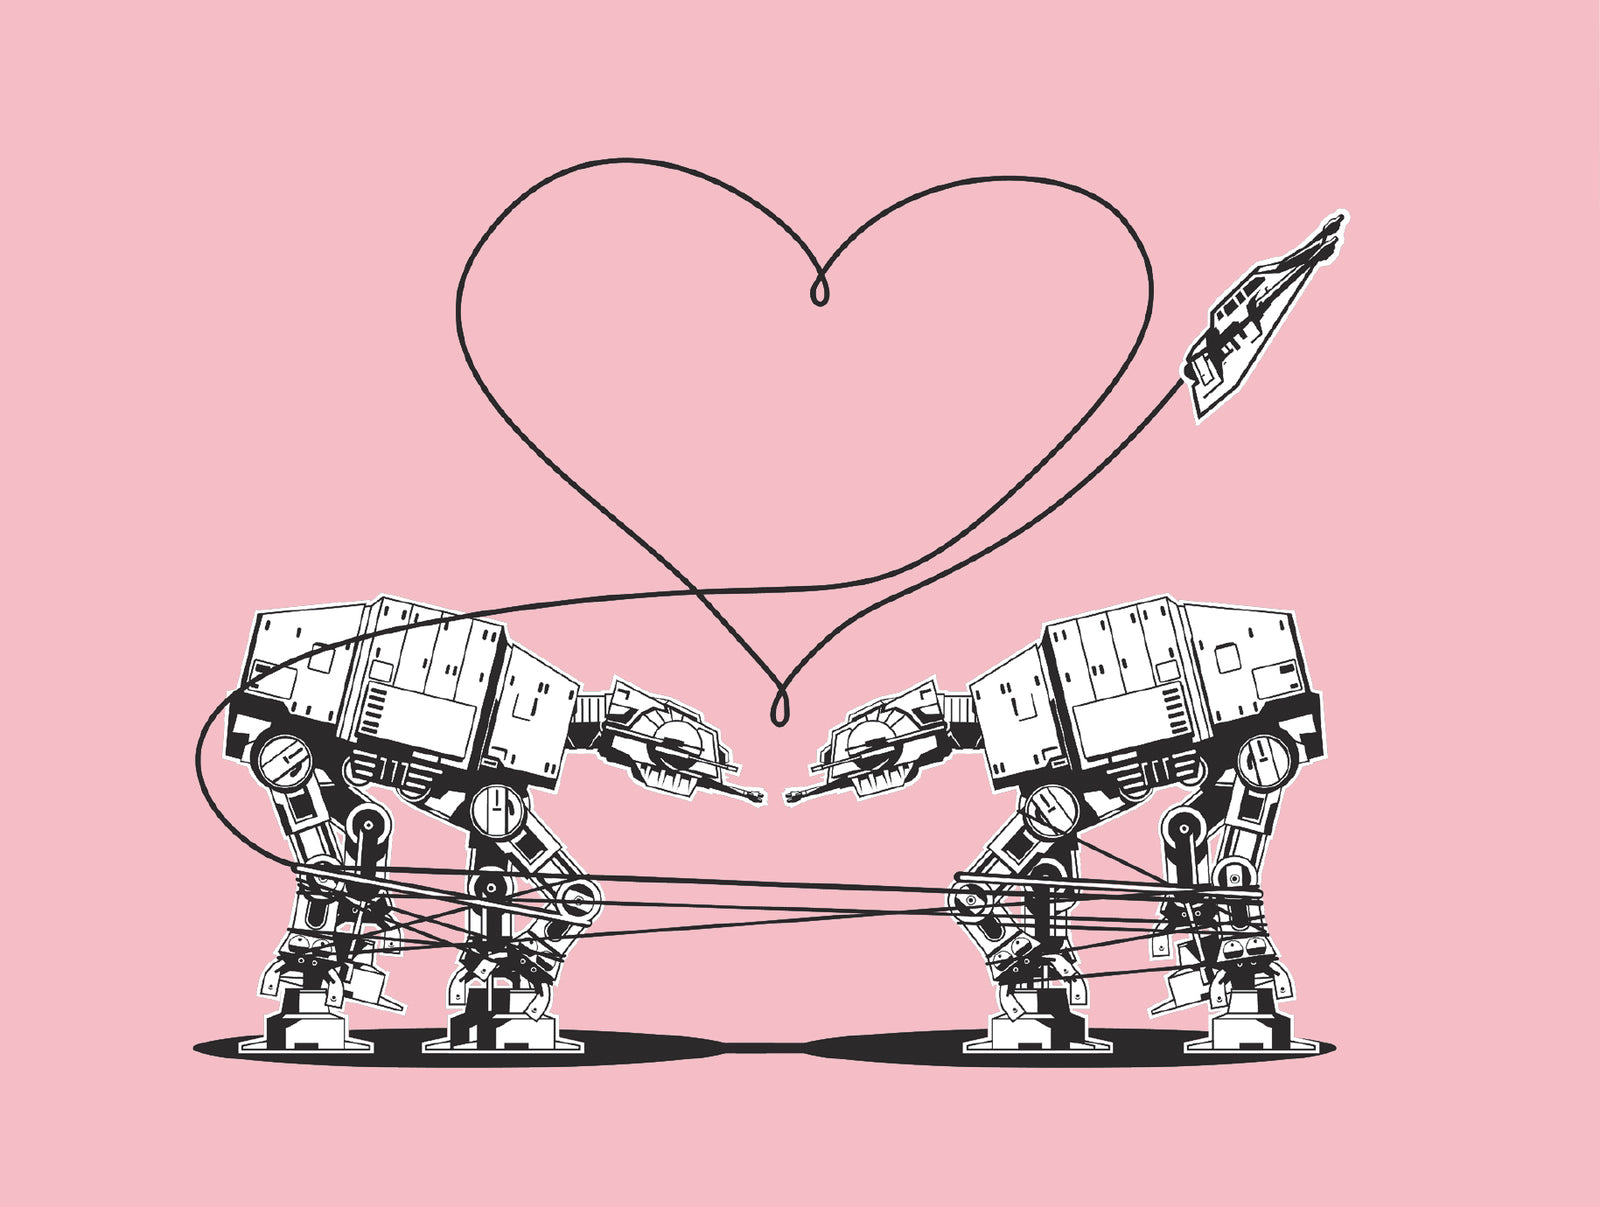 Postcard: Love AT-AT First Sight - Pink - Ten Pack